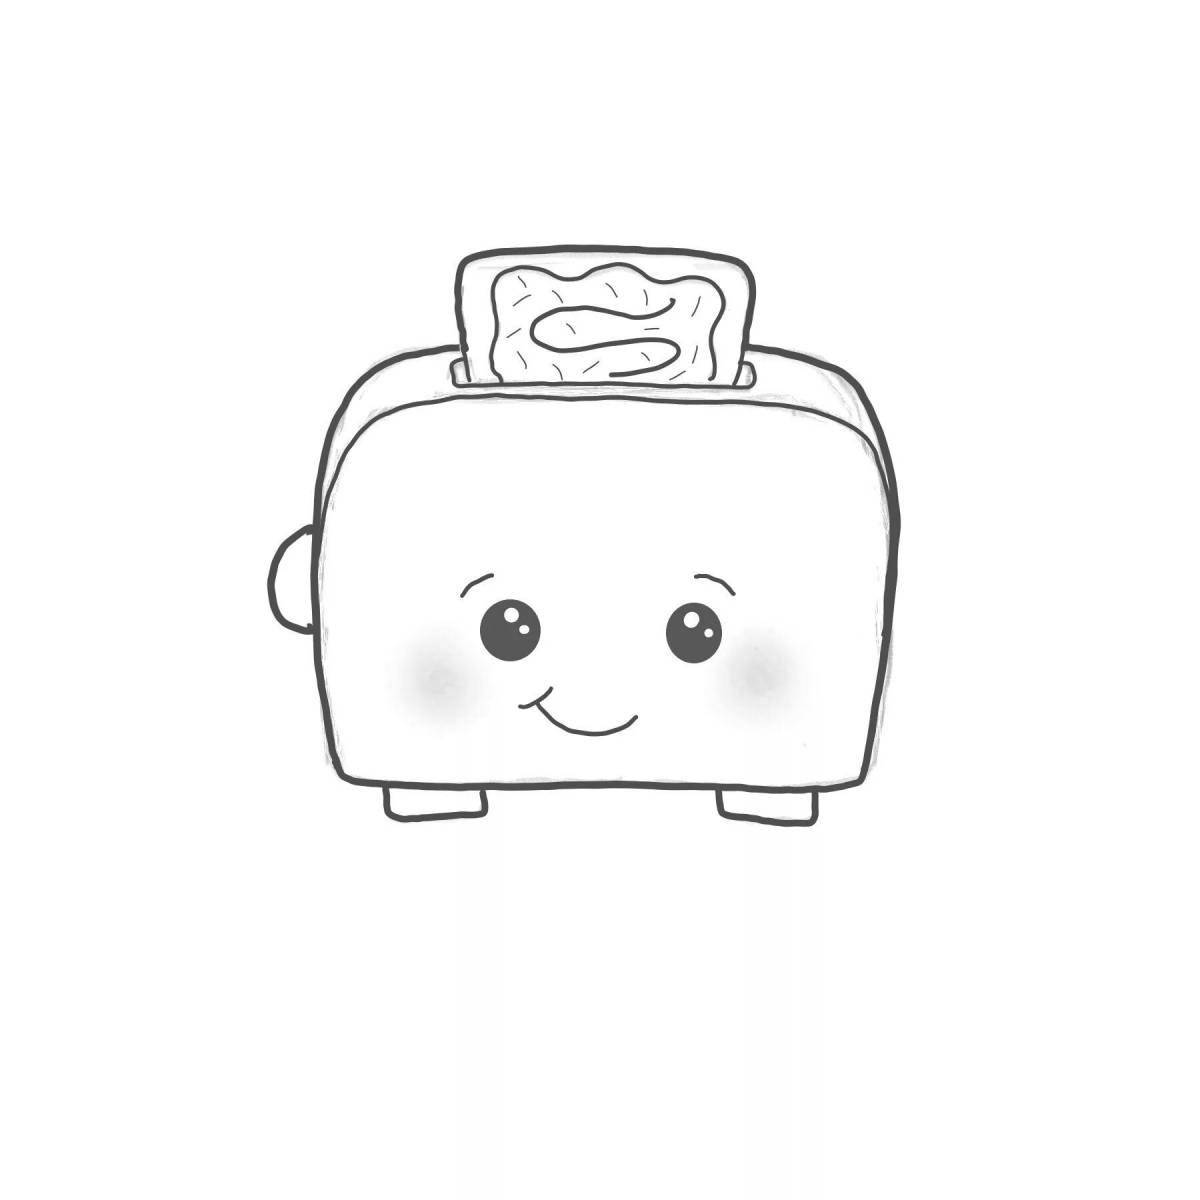 Tempting toaster coloring page